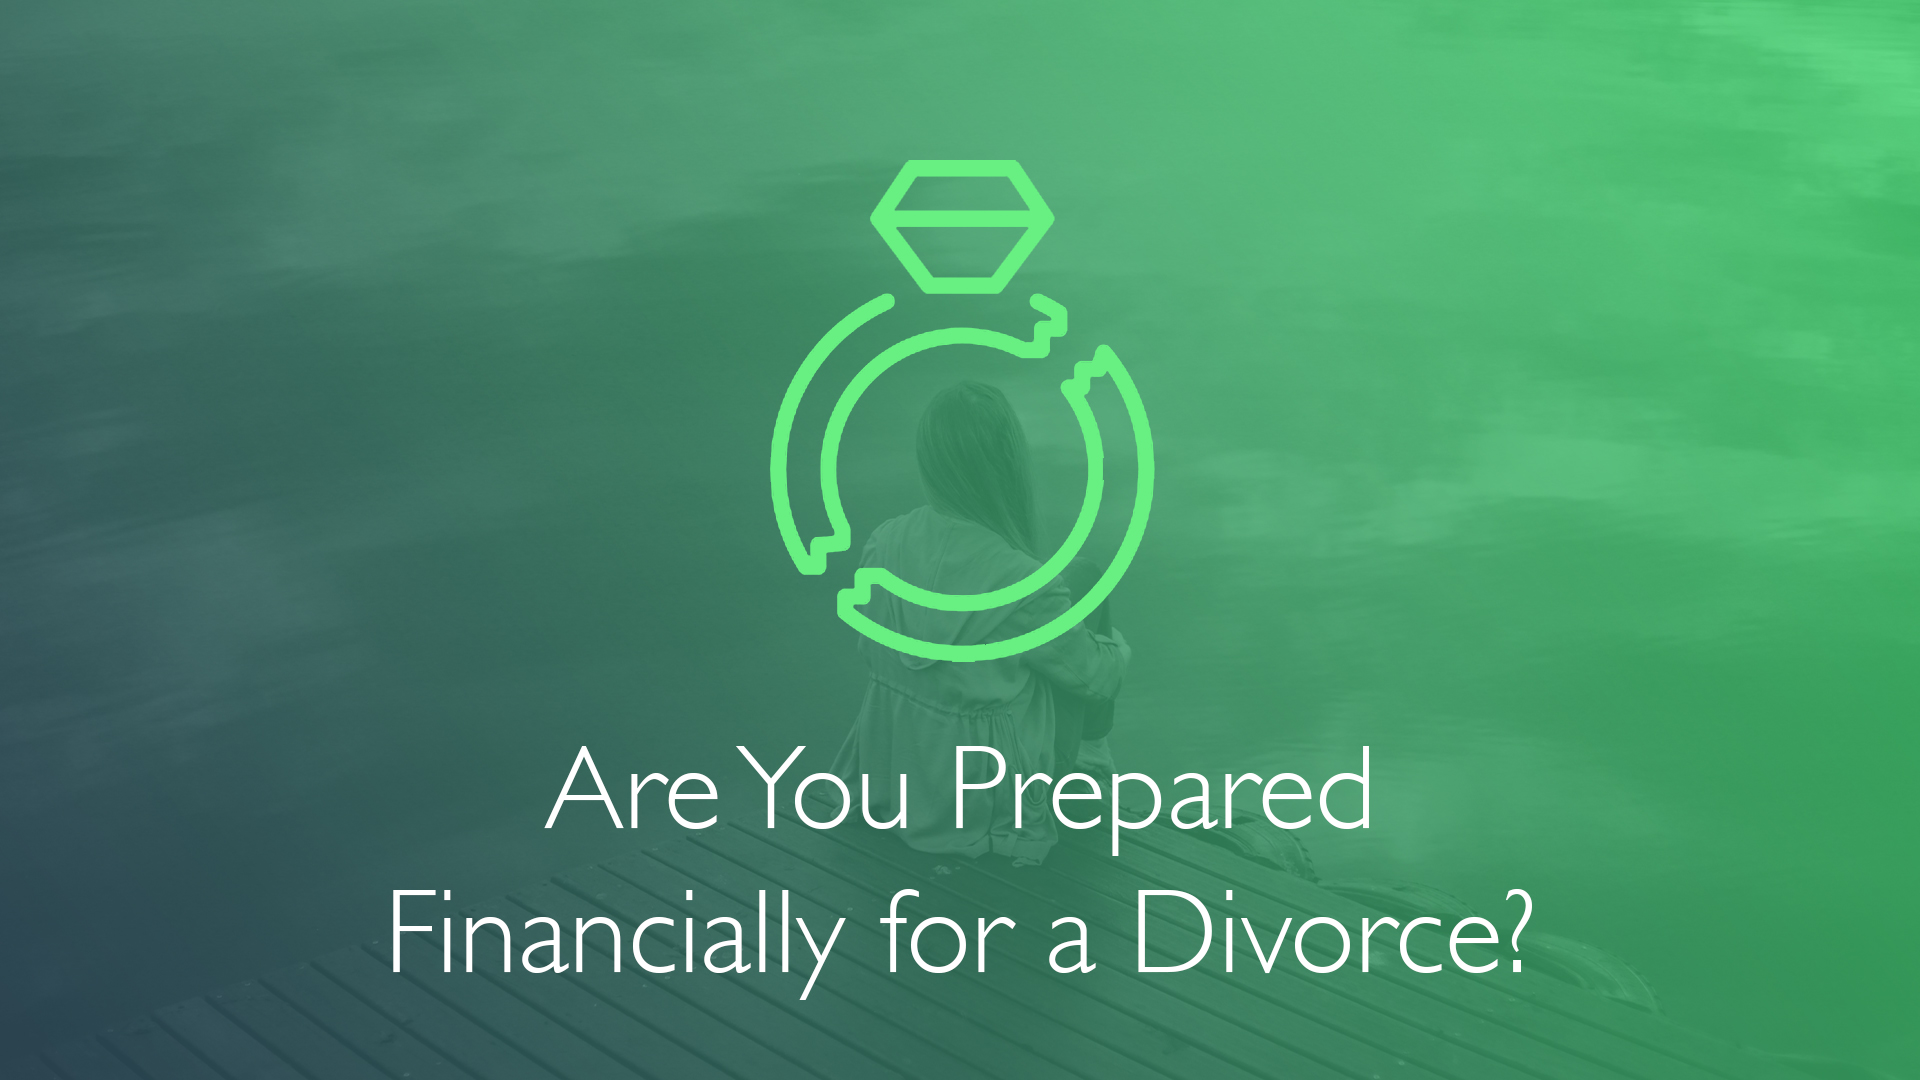 Are You Prepared Financially for a Divorce?-Financial Symmetry, Inc.